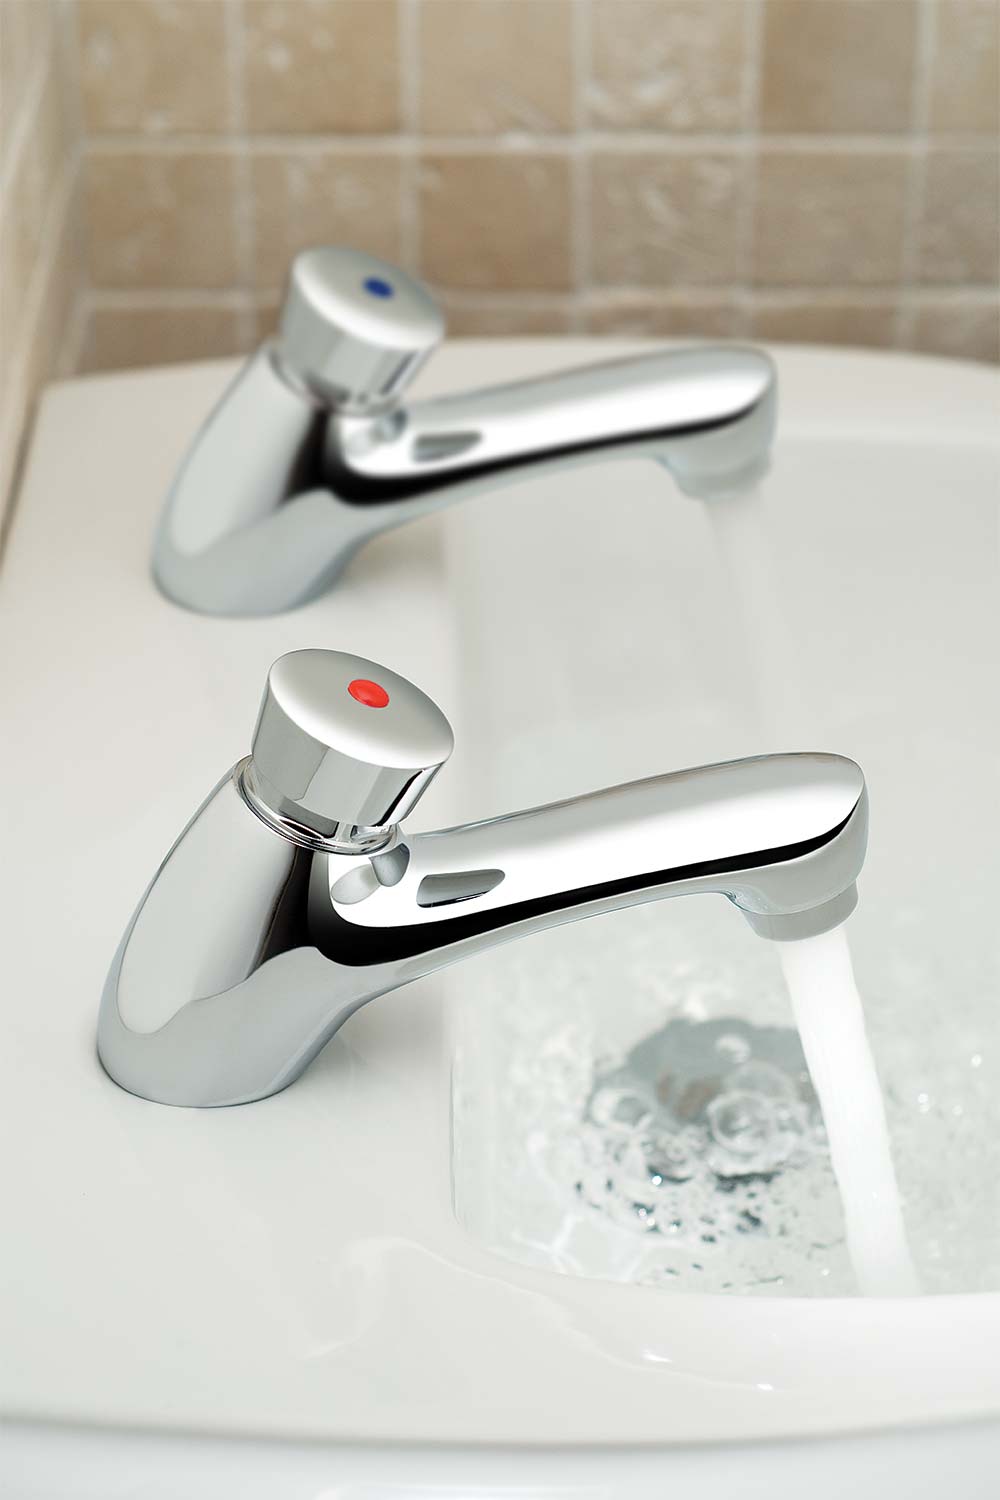 A pair of non-concussive push-type basin pillar taps with flowing water on a white basin.